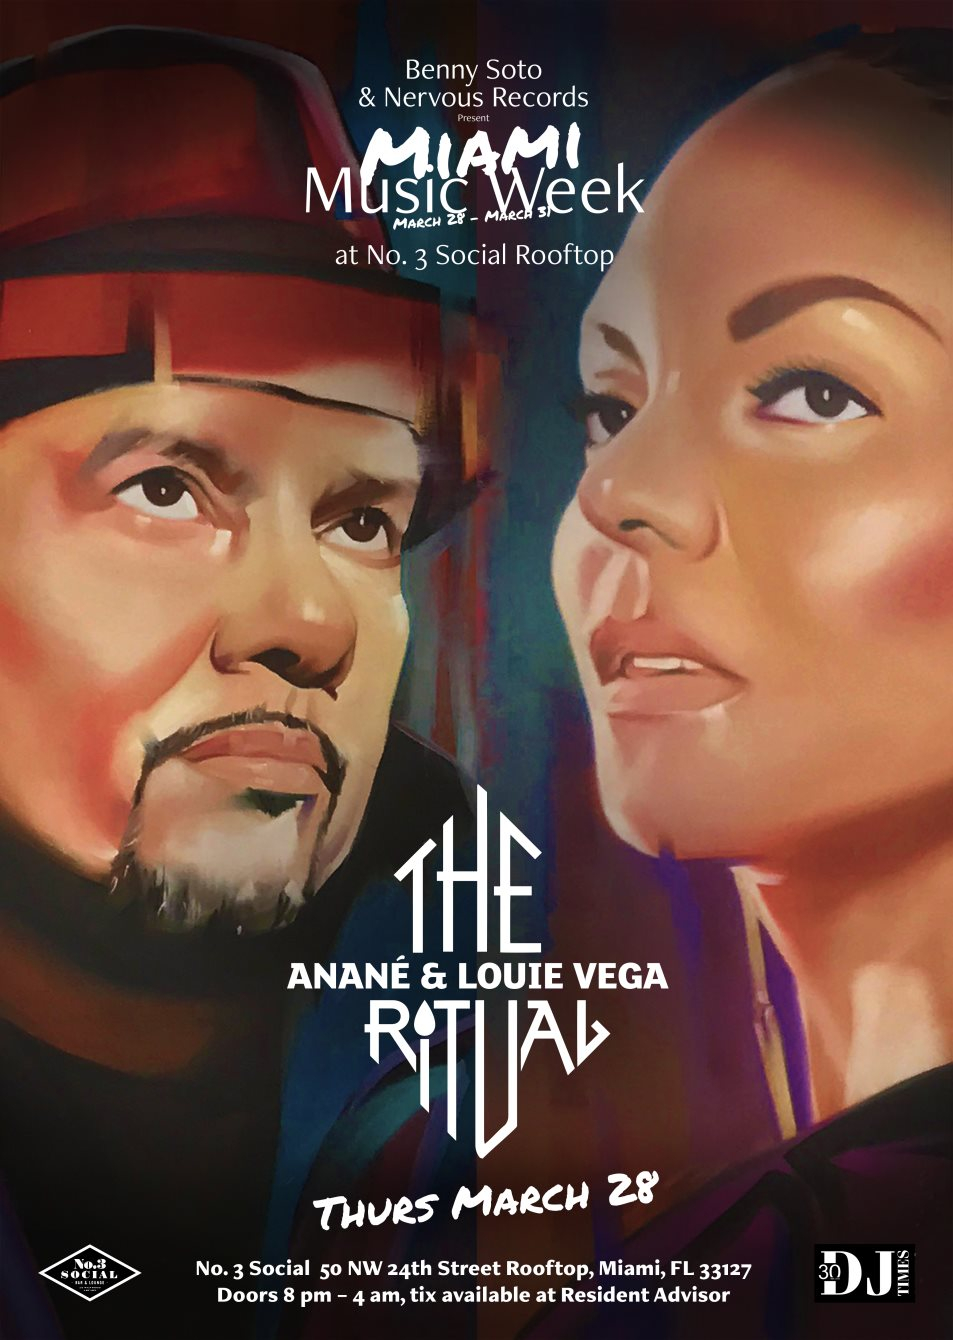 The Ritual with Anané & Louie Vega - Flyer back